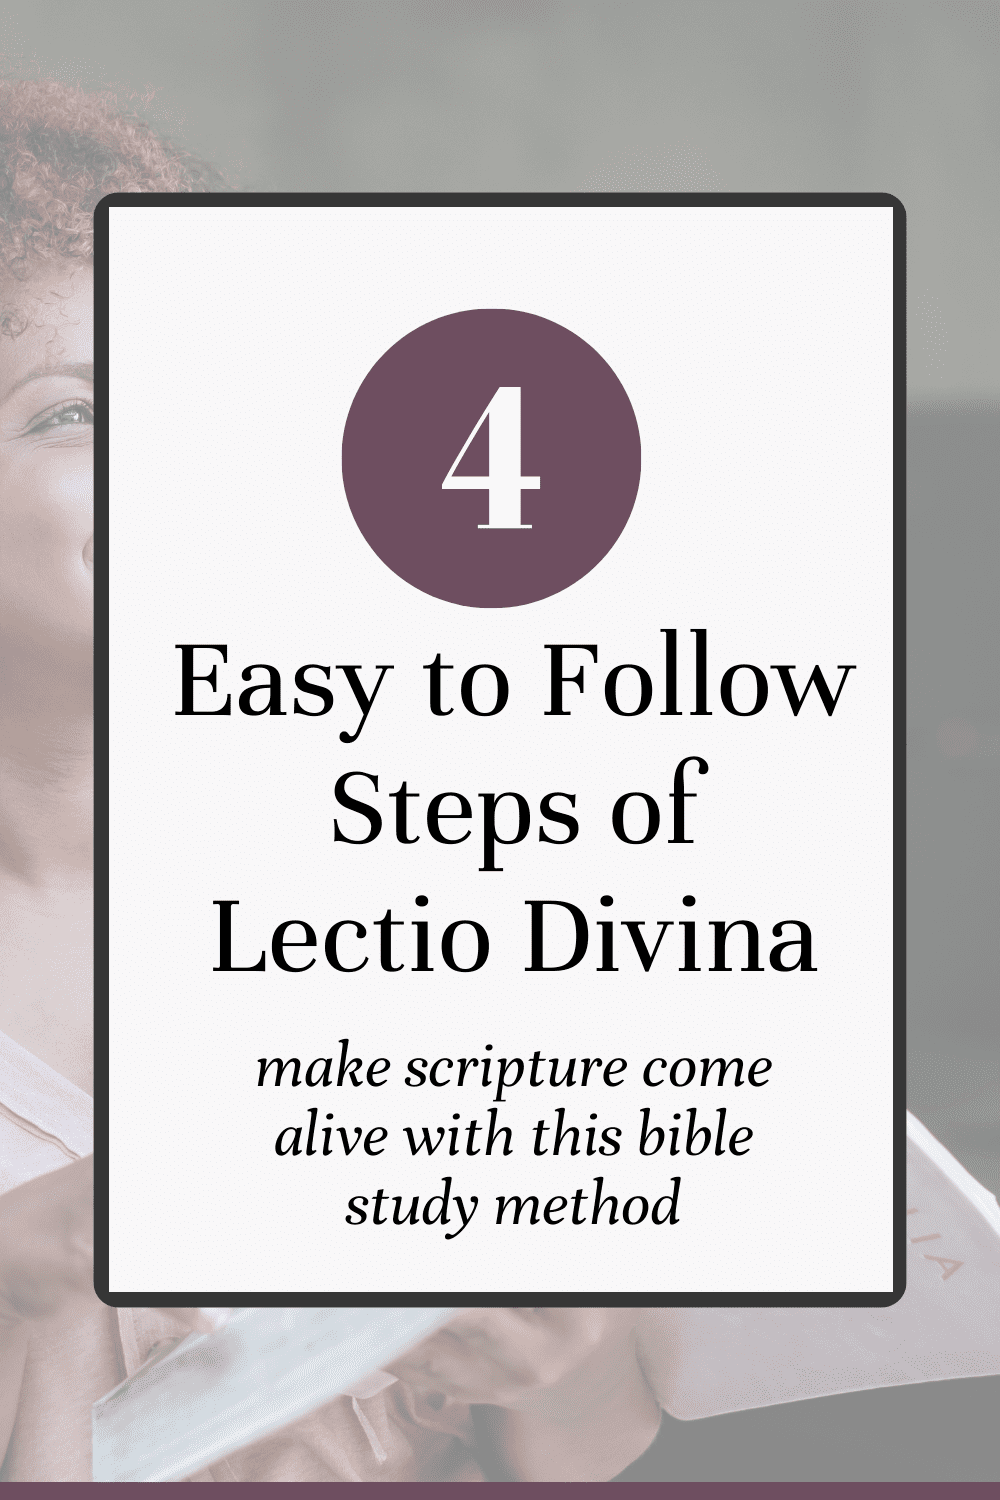 Are you ready to experience scripture in a whole new way? Learn the 4 steps to Lectio Divina and how to study the bible - without having to feel bored or like you aren't sure what to do. Plus, tips about how this bible study method is great for beginners and a way to include prayer in your quiet time with God.